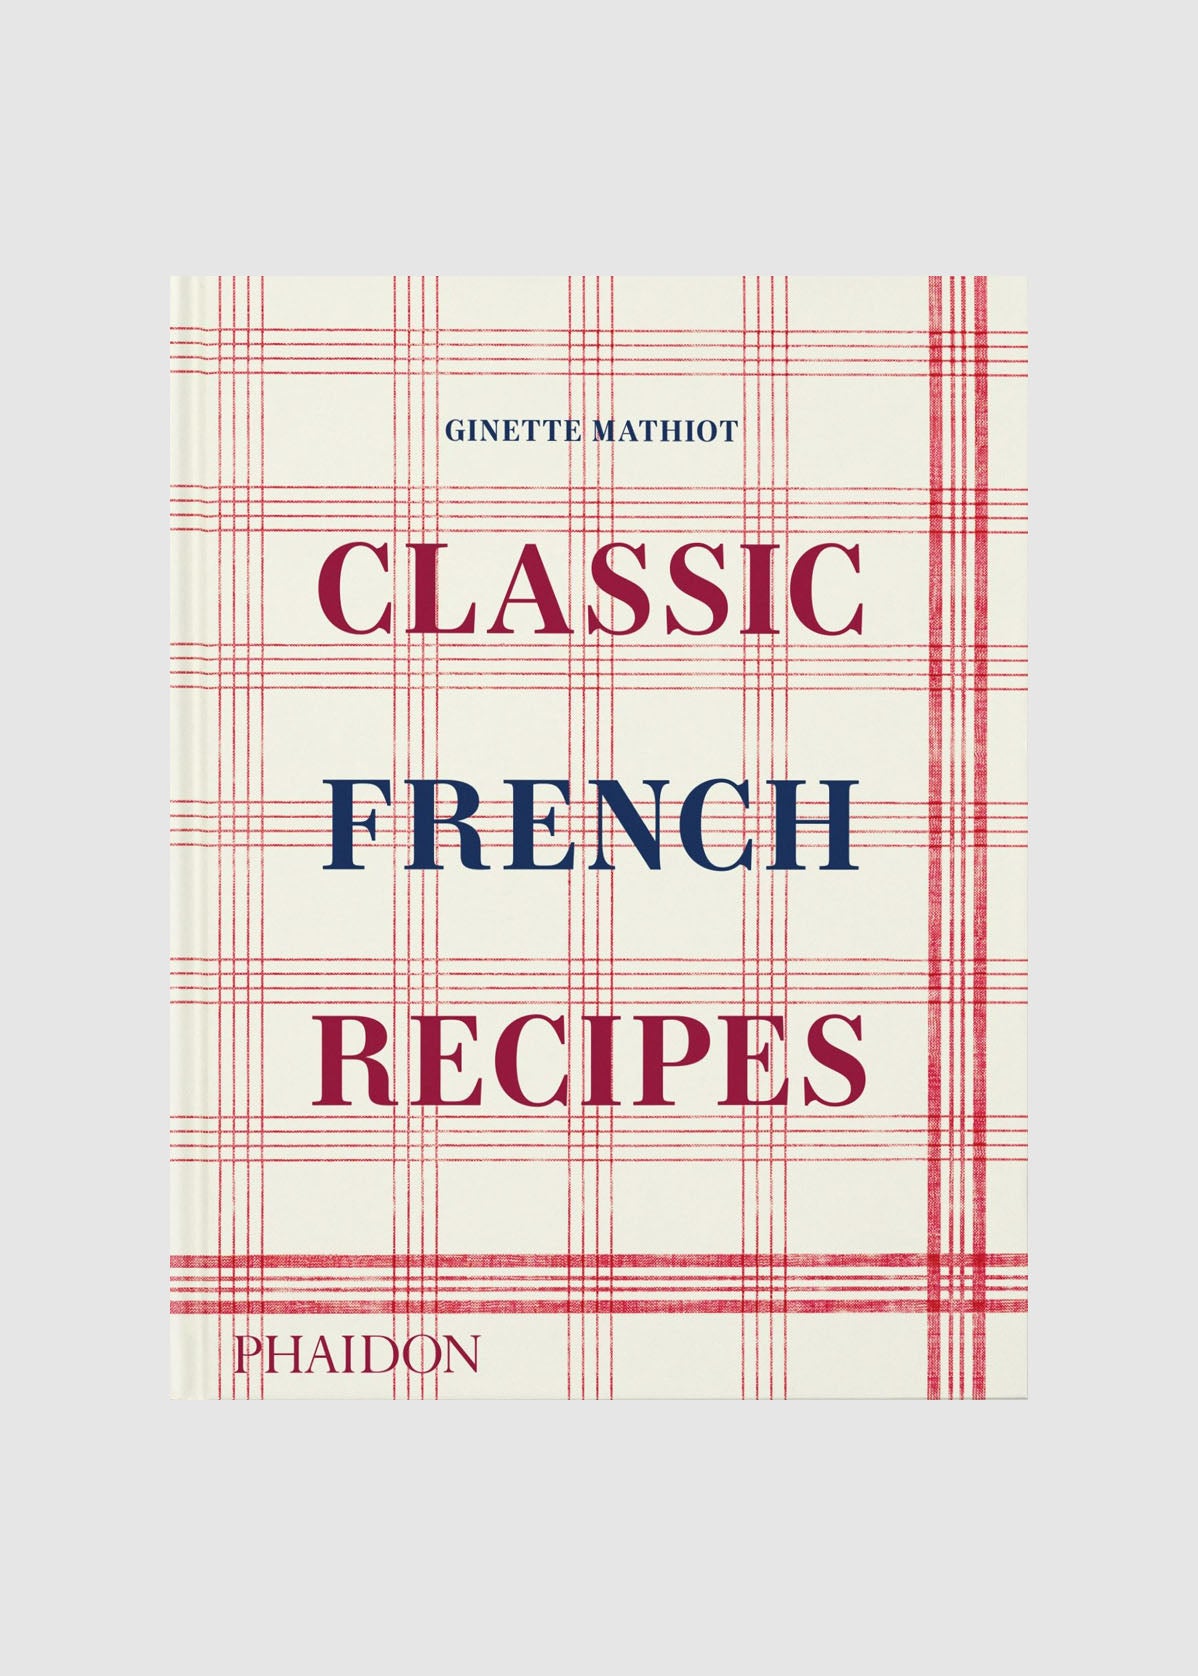 CLASSIC FRENCH RECIPES BY GINETTE MATHIOT